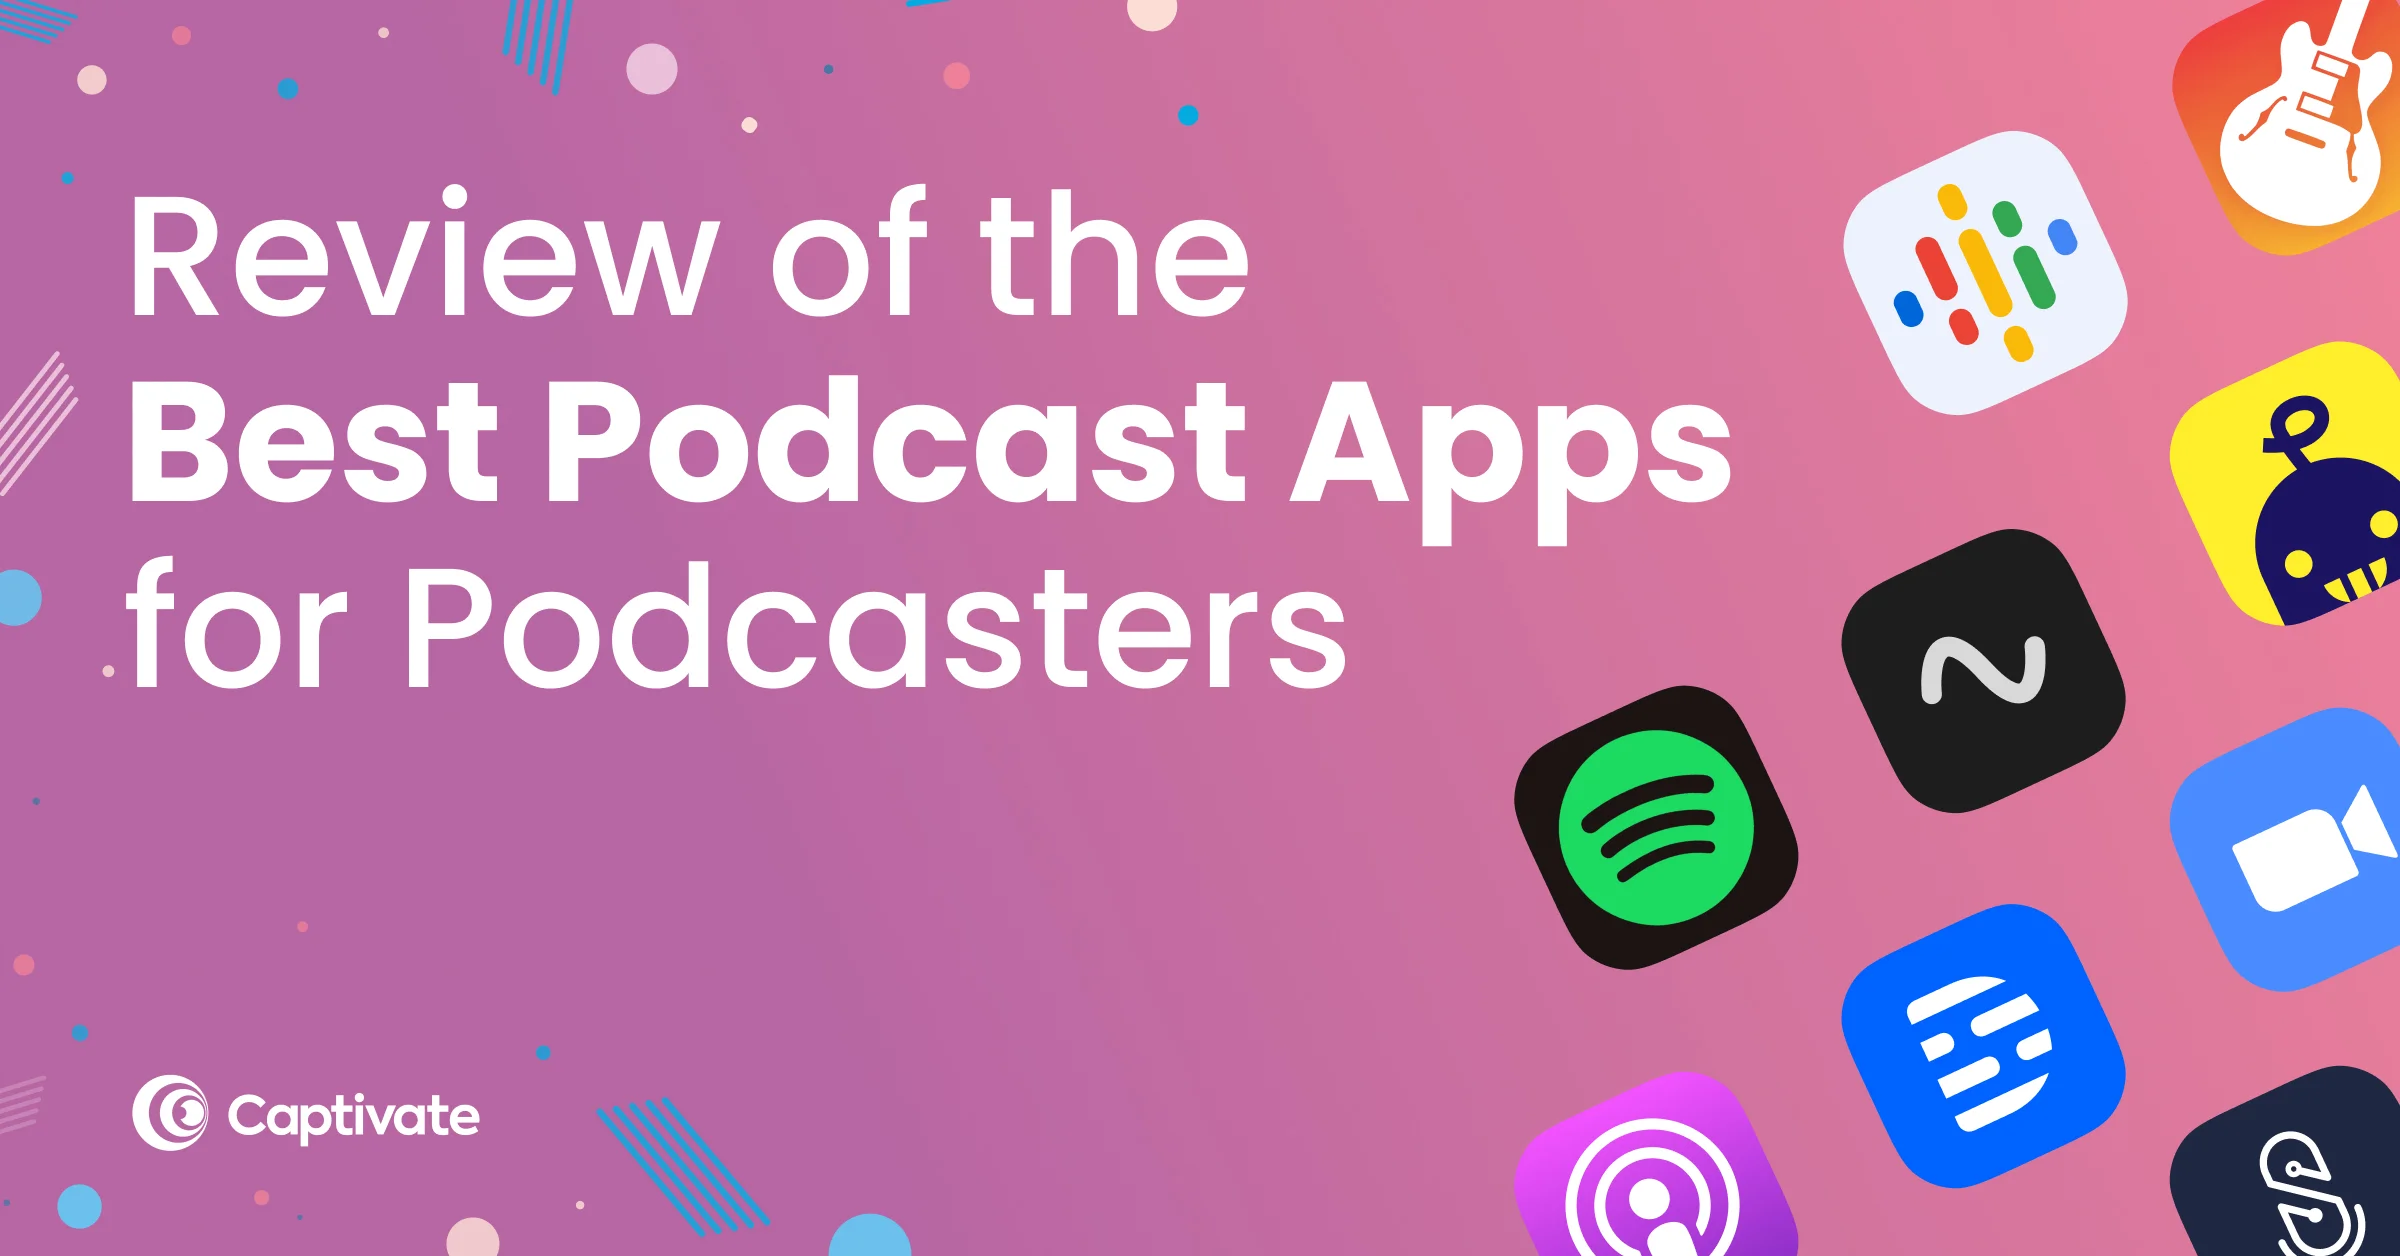 Review of the Best Podcast Apps for Podcasters | Captivate